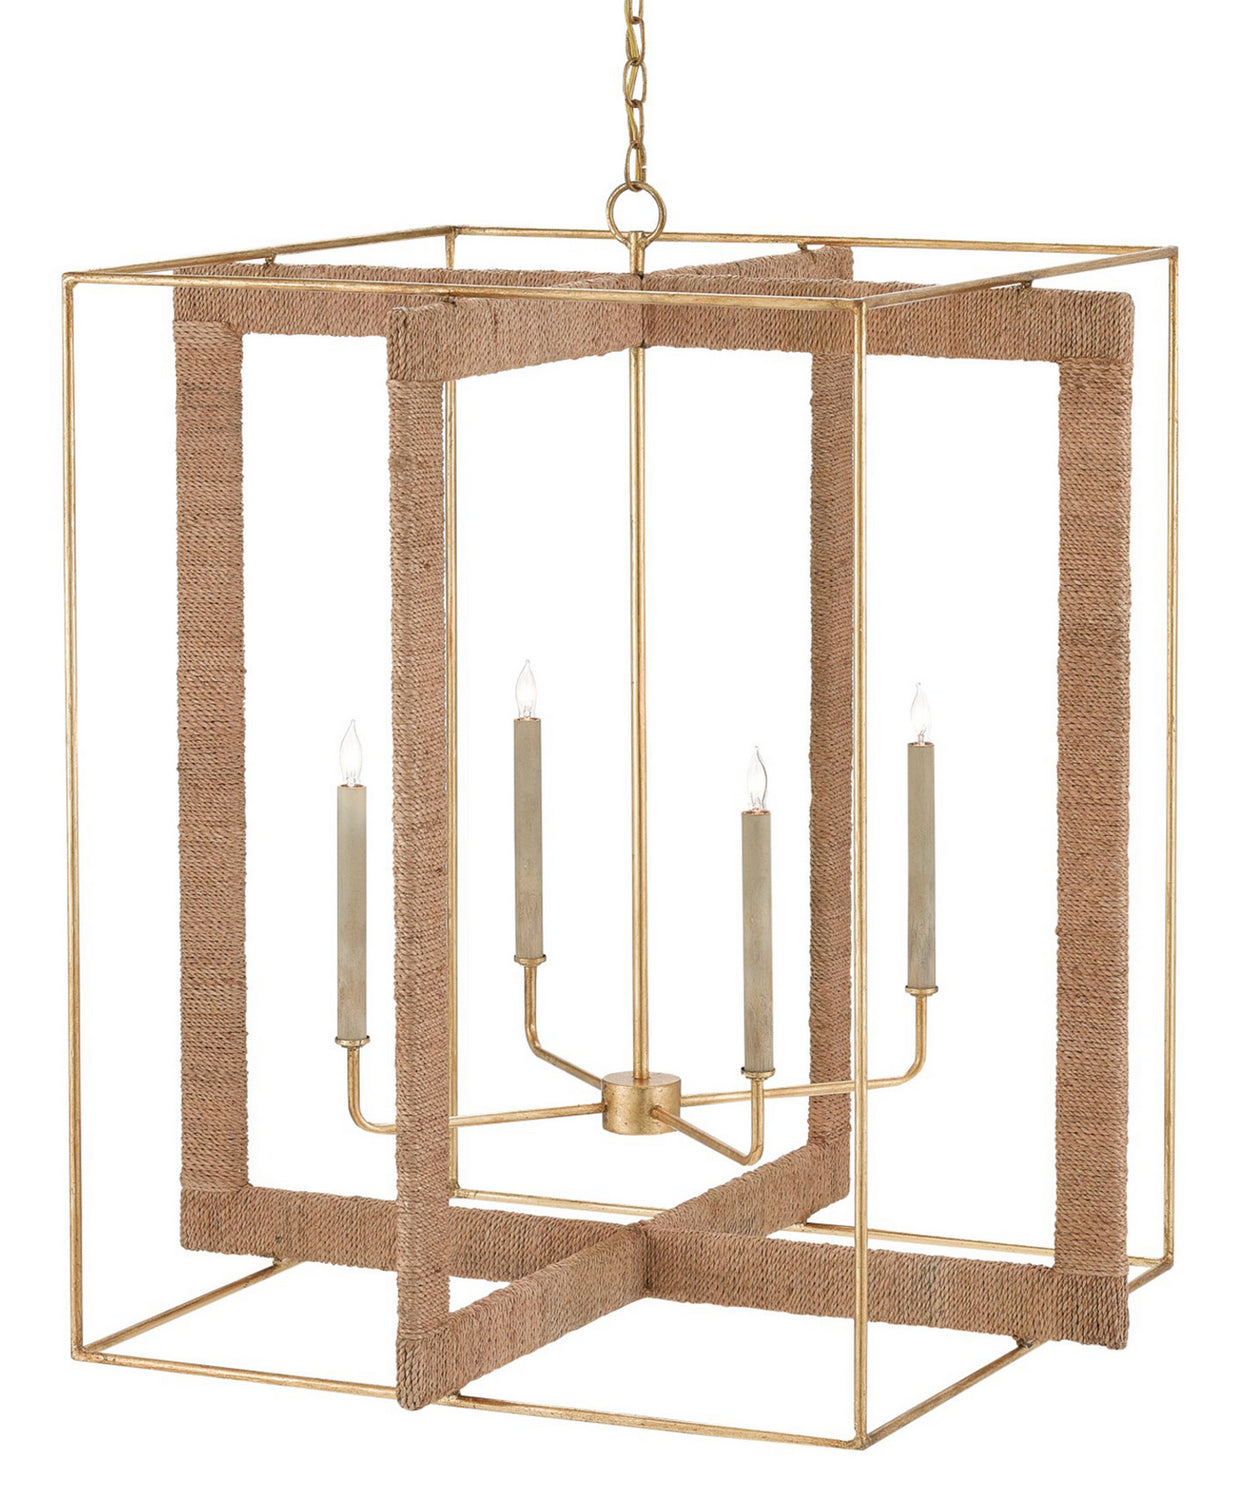 Four Light Lantern from the Purebred collection in Contemporary Gold Leaf/Natural finish